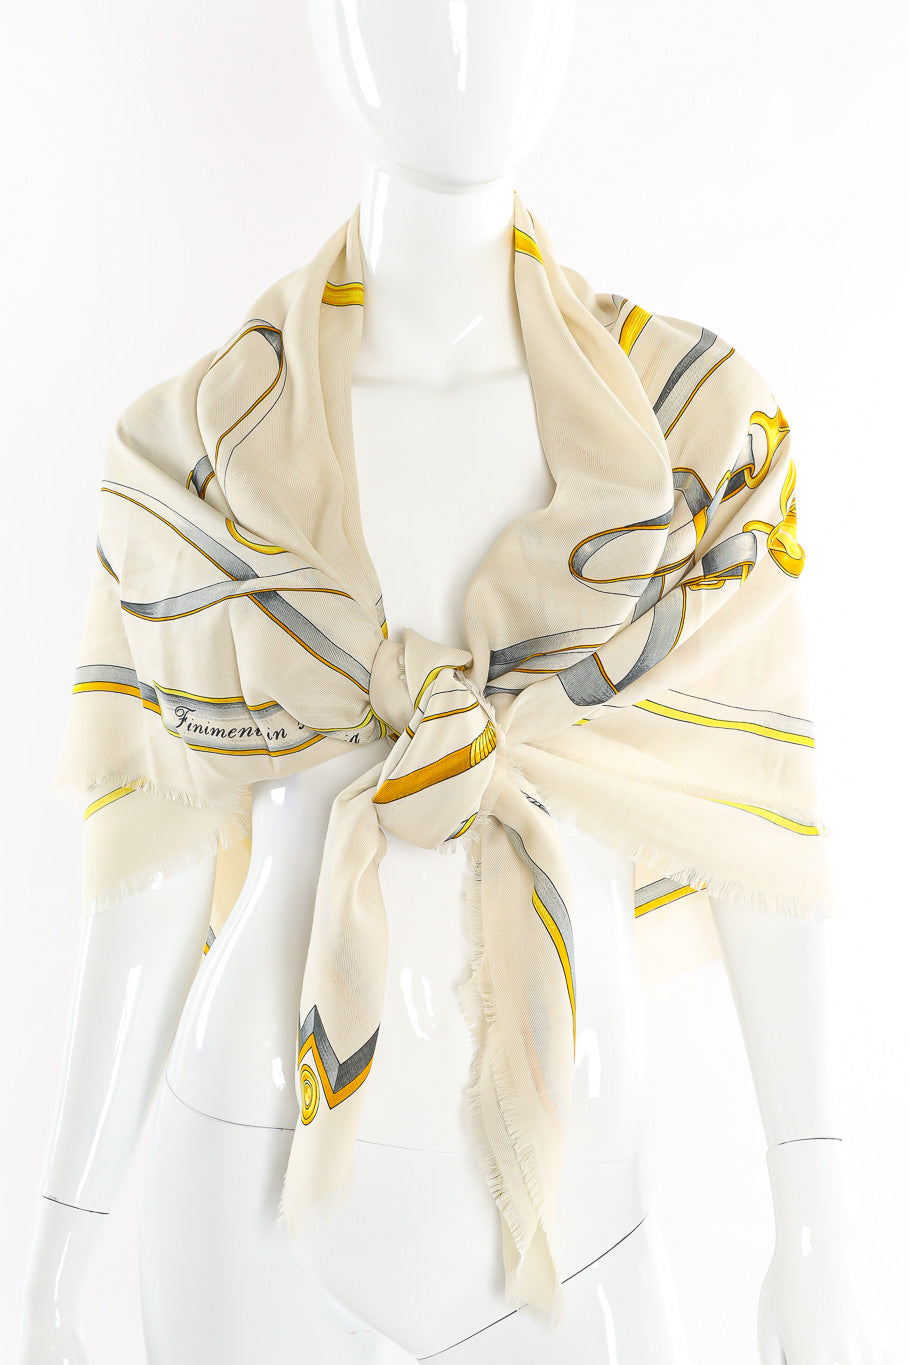 Large horsebit graphic scarf by Gucci photo on Mannequin. @recessla